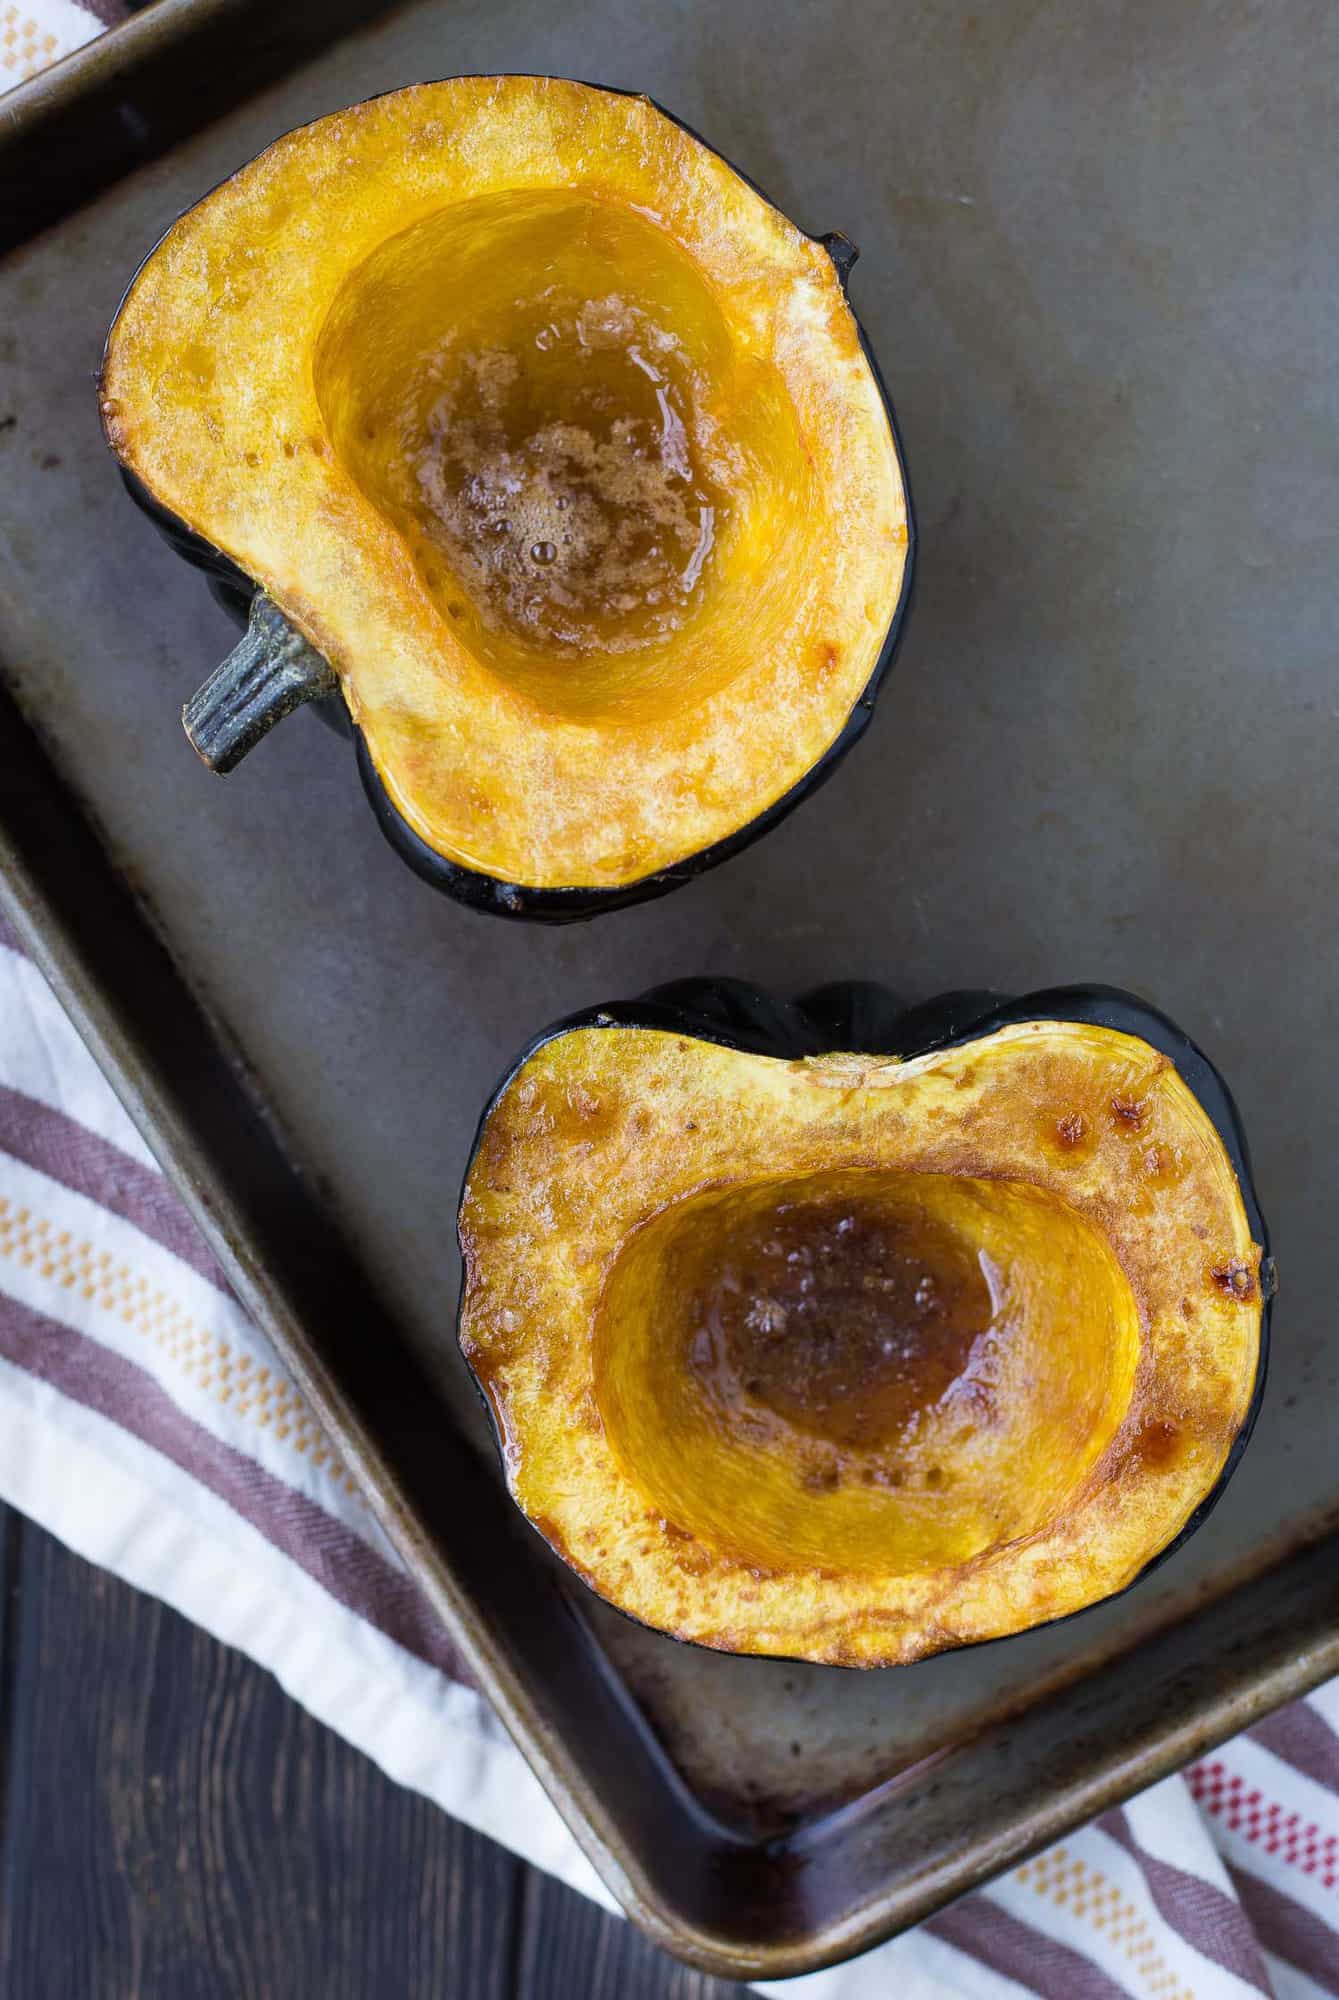 Two halves of roasted acorn squash with brown sugar and butter, on a baking sheet.